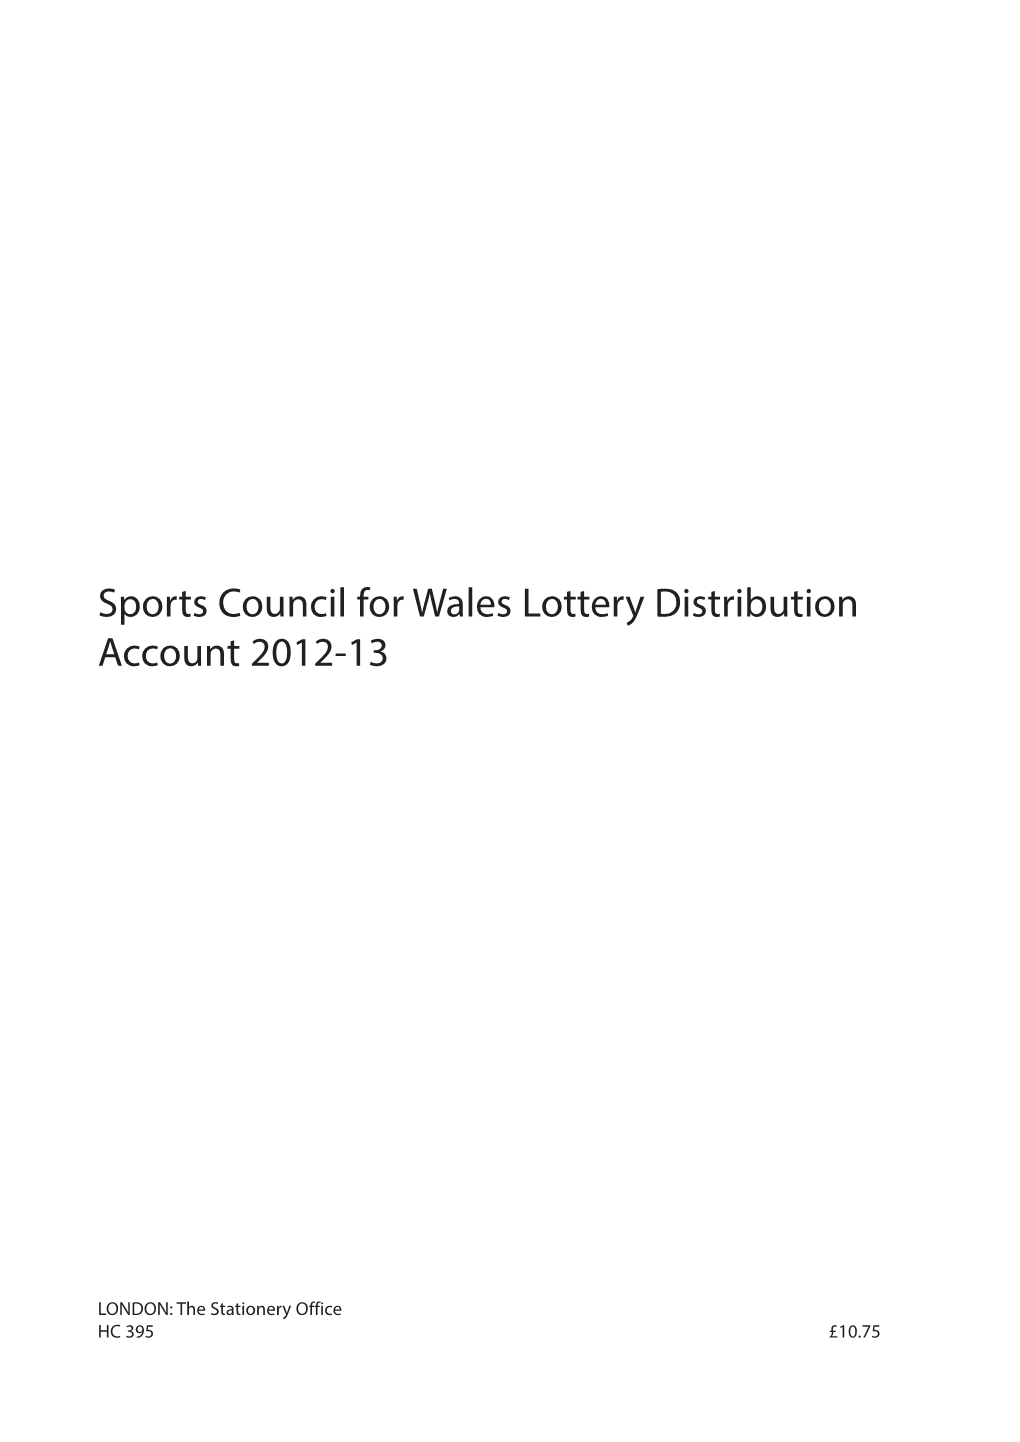 Sports Council for Wales Lottery Distribution Account 2012-13